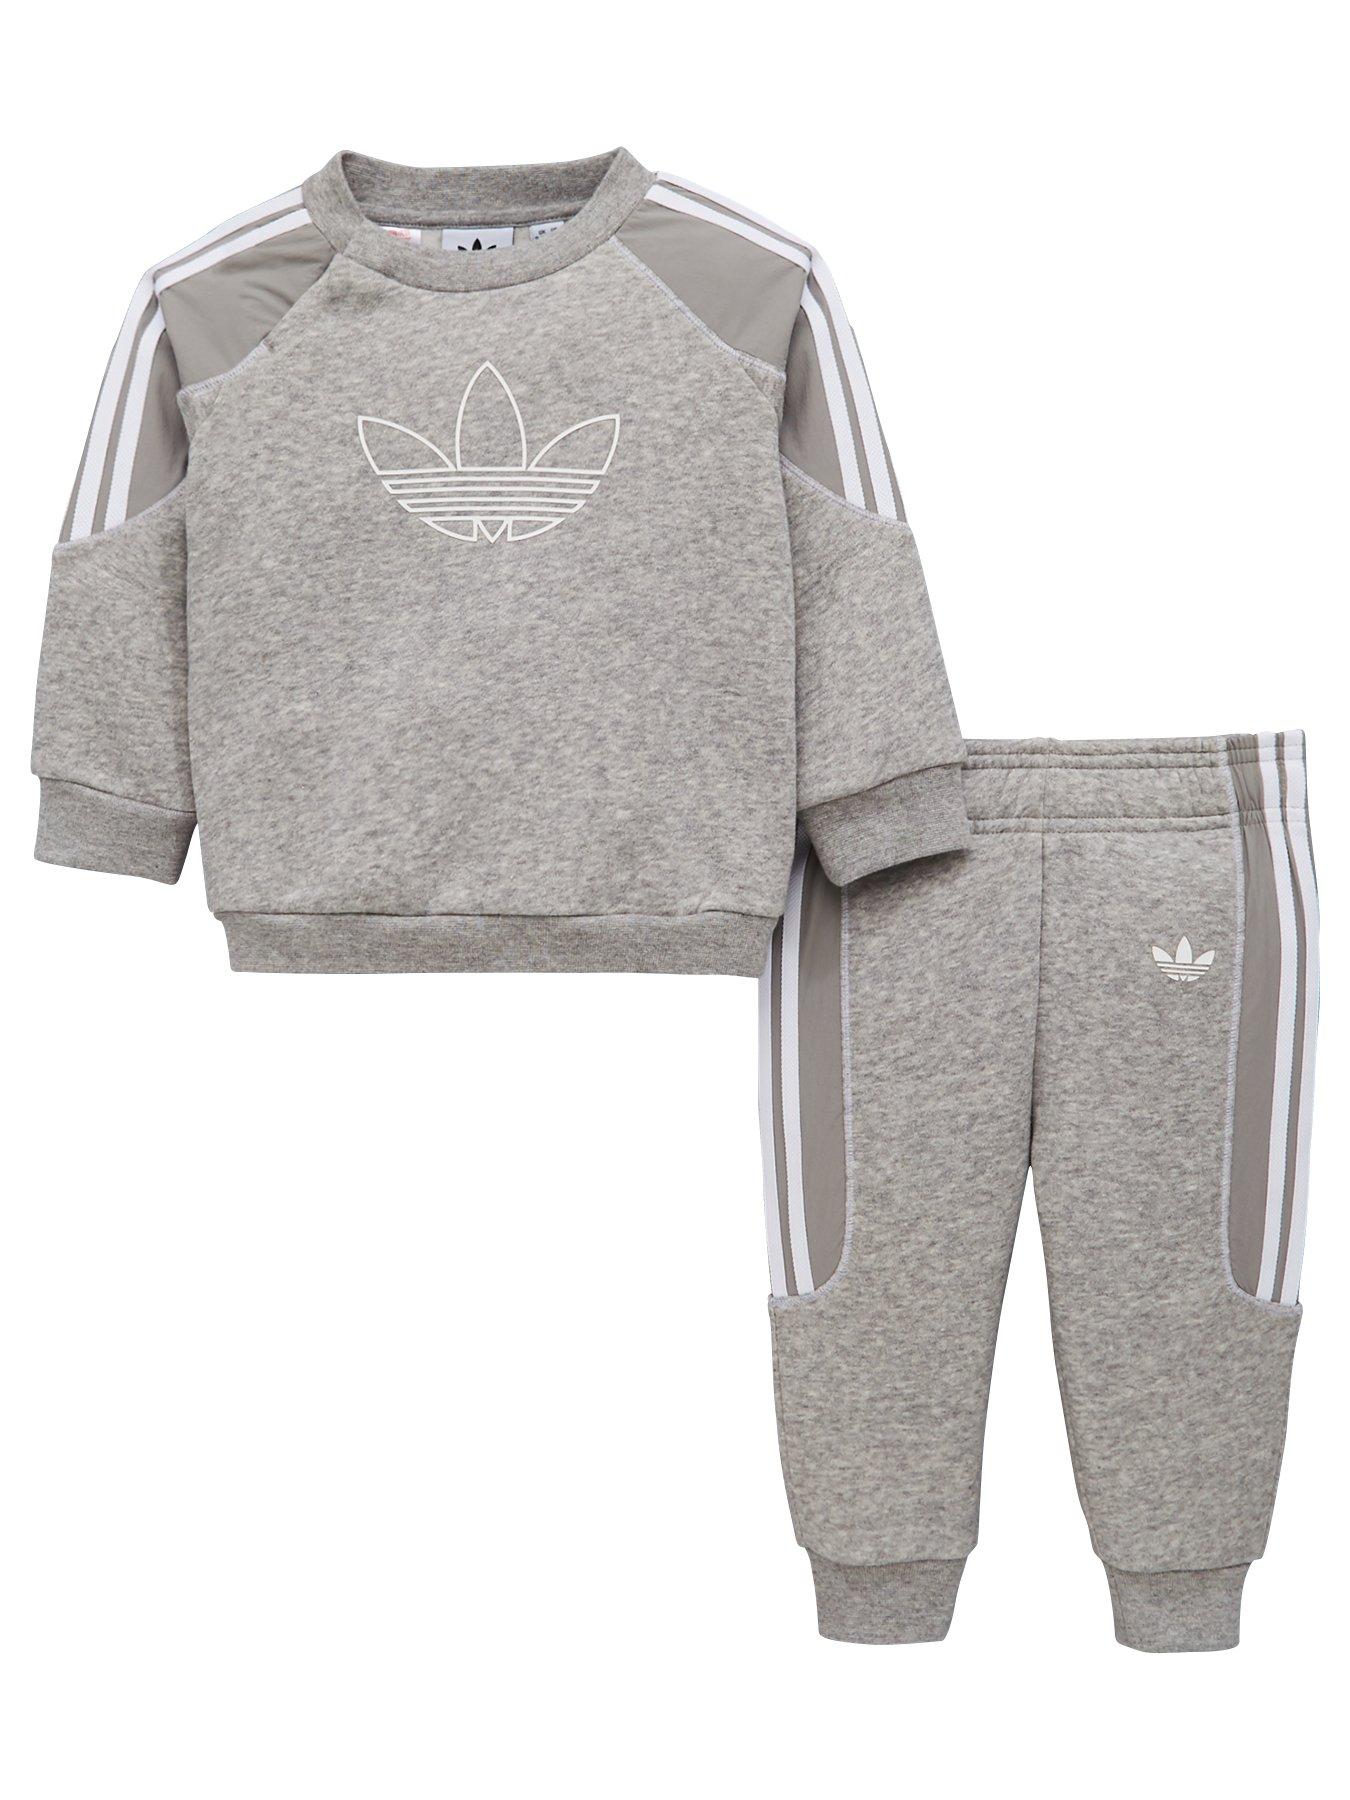 Adidas | Baby clothes | Child & baby | www.littlewoods.com